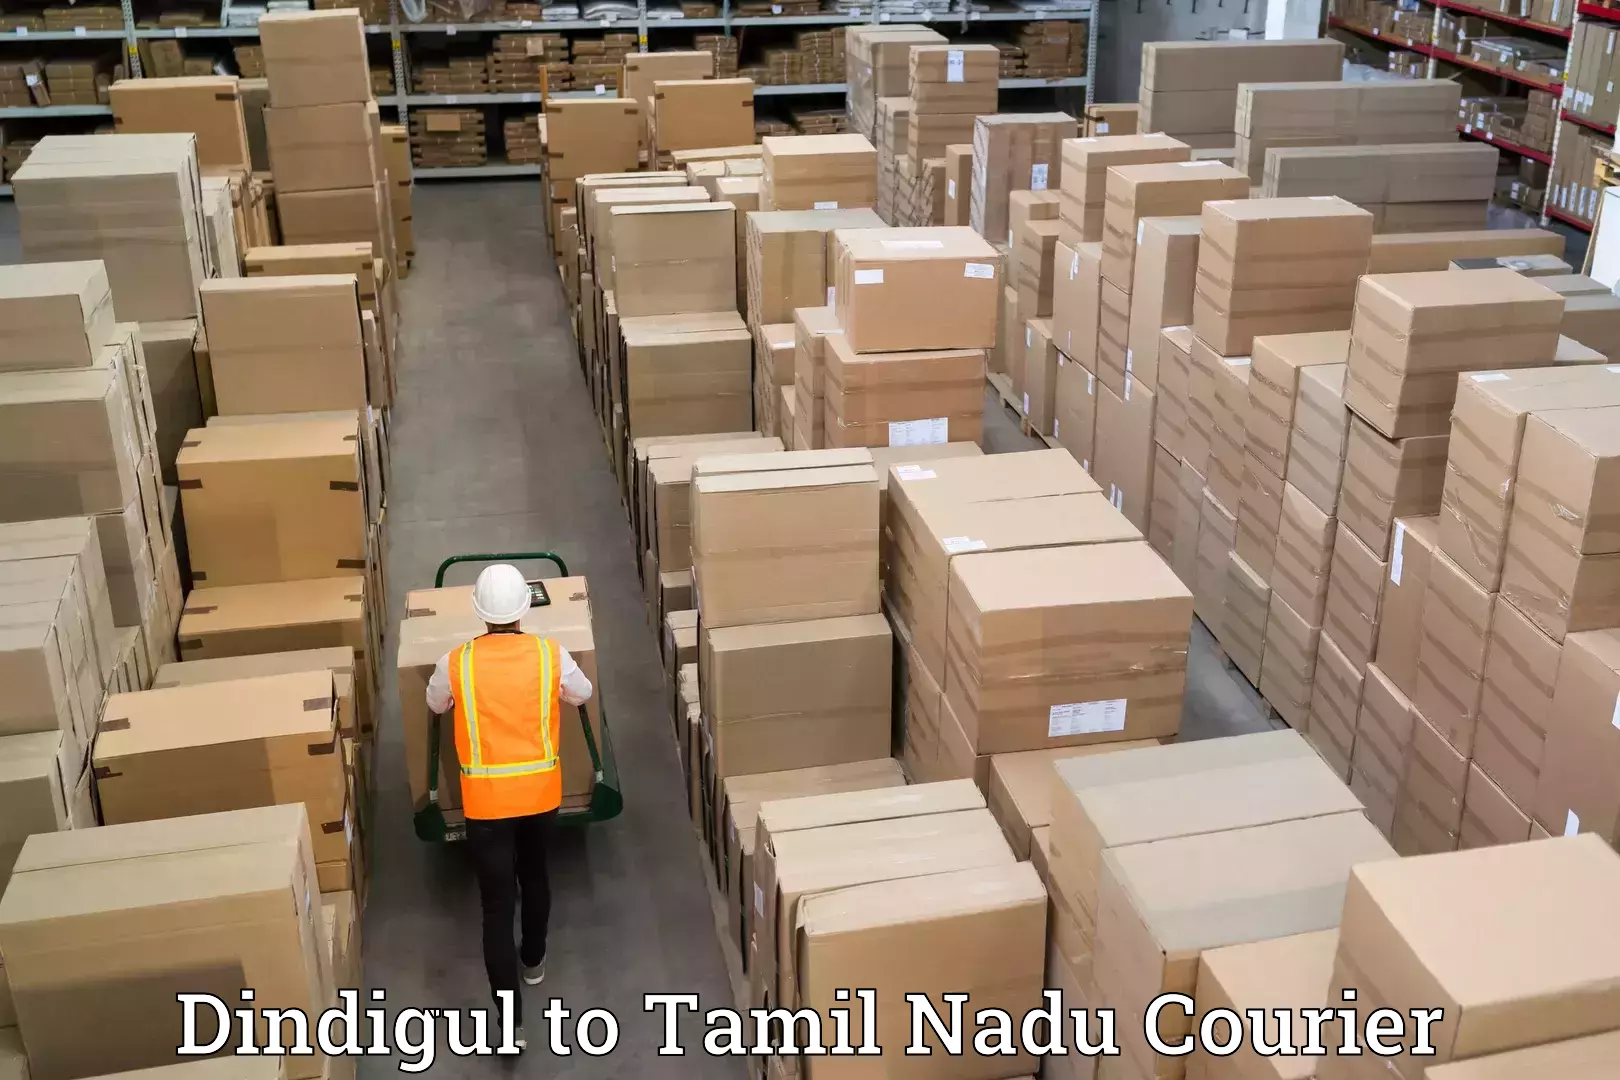 Full-service movers in Dindigul to Tamil Nadu